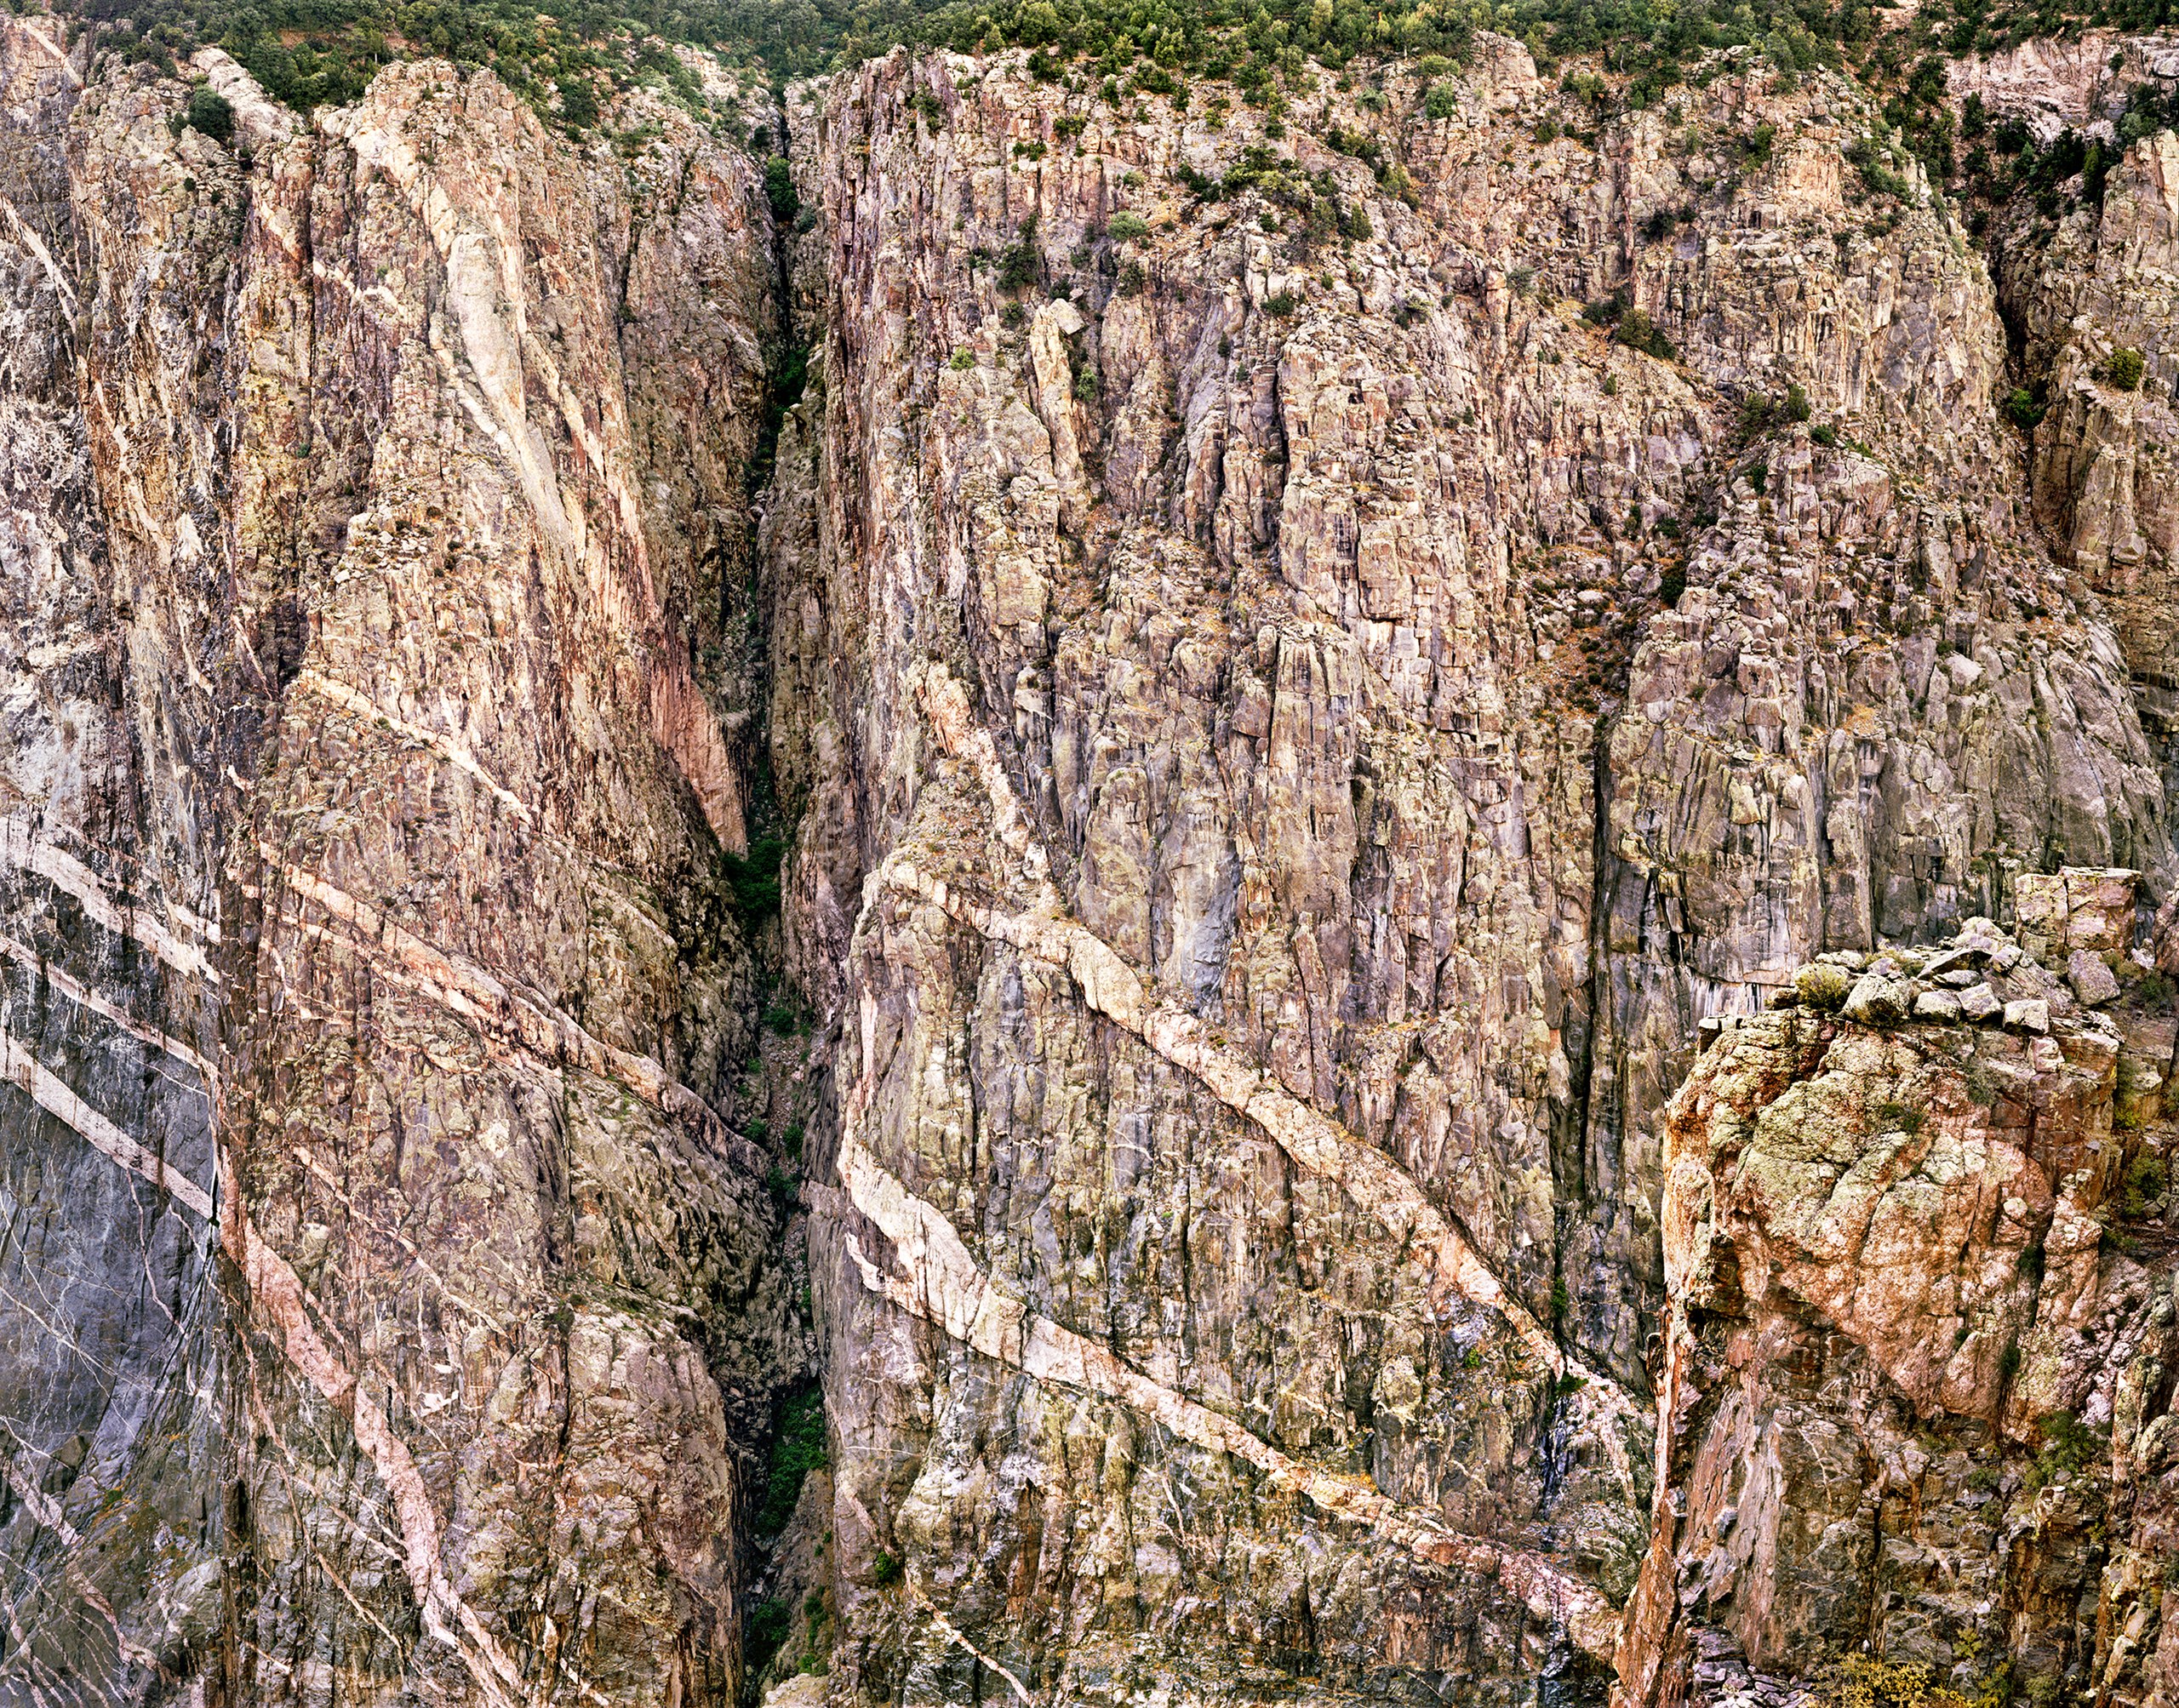 Painted Wall, North Rim, Black Canyon of the Gunnison, Colorado 